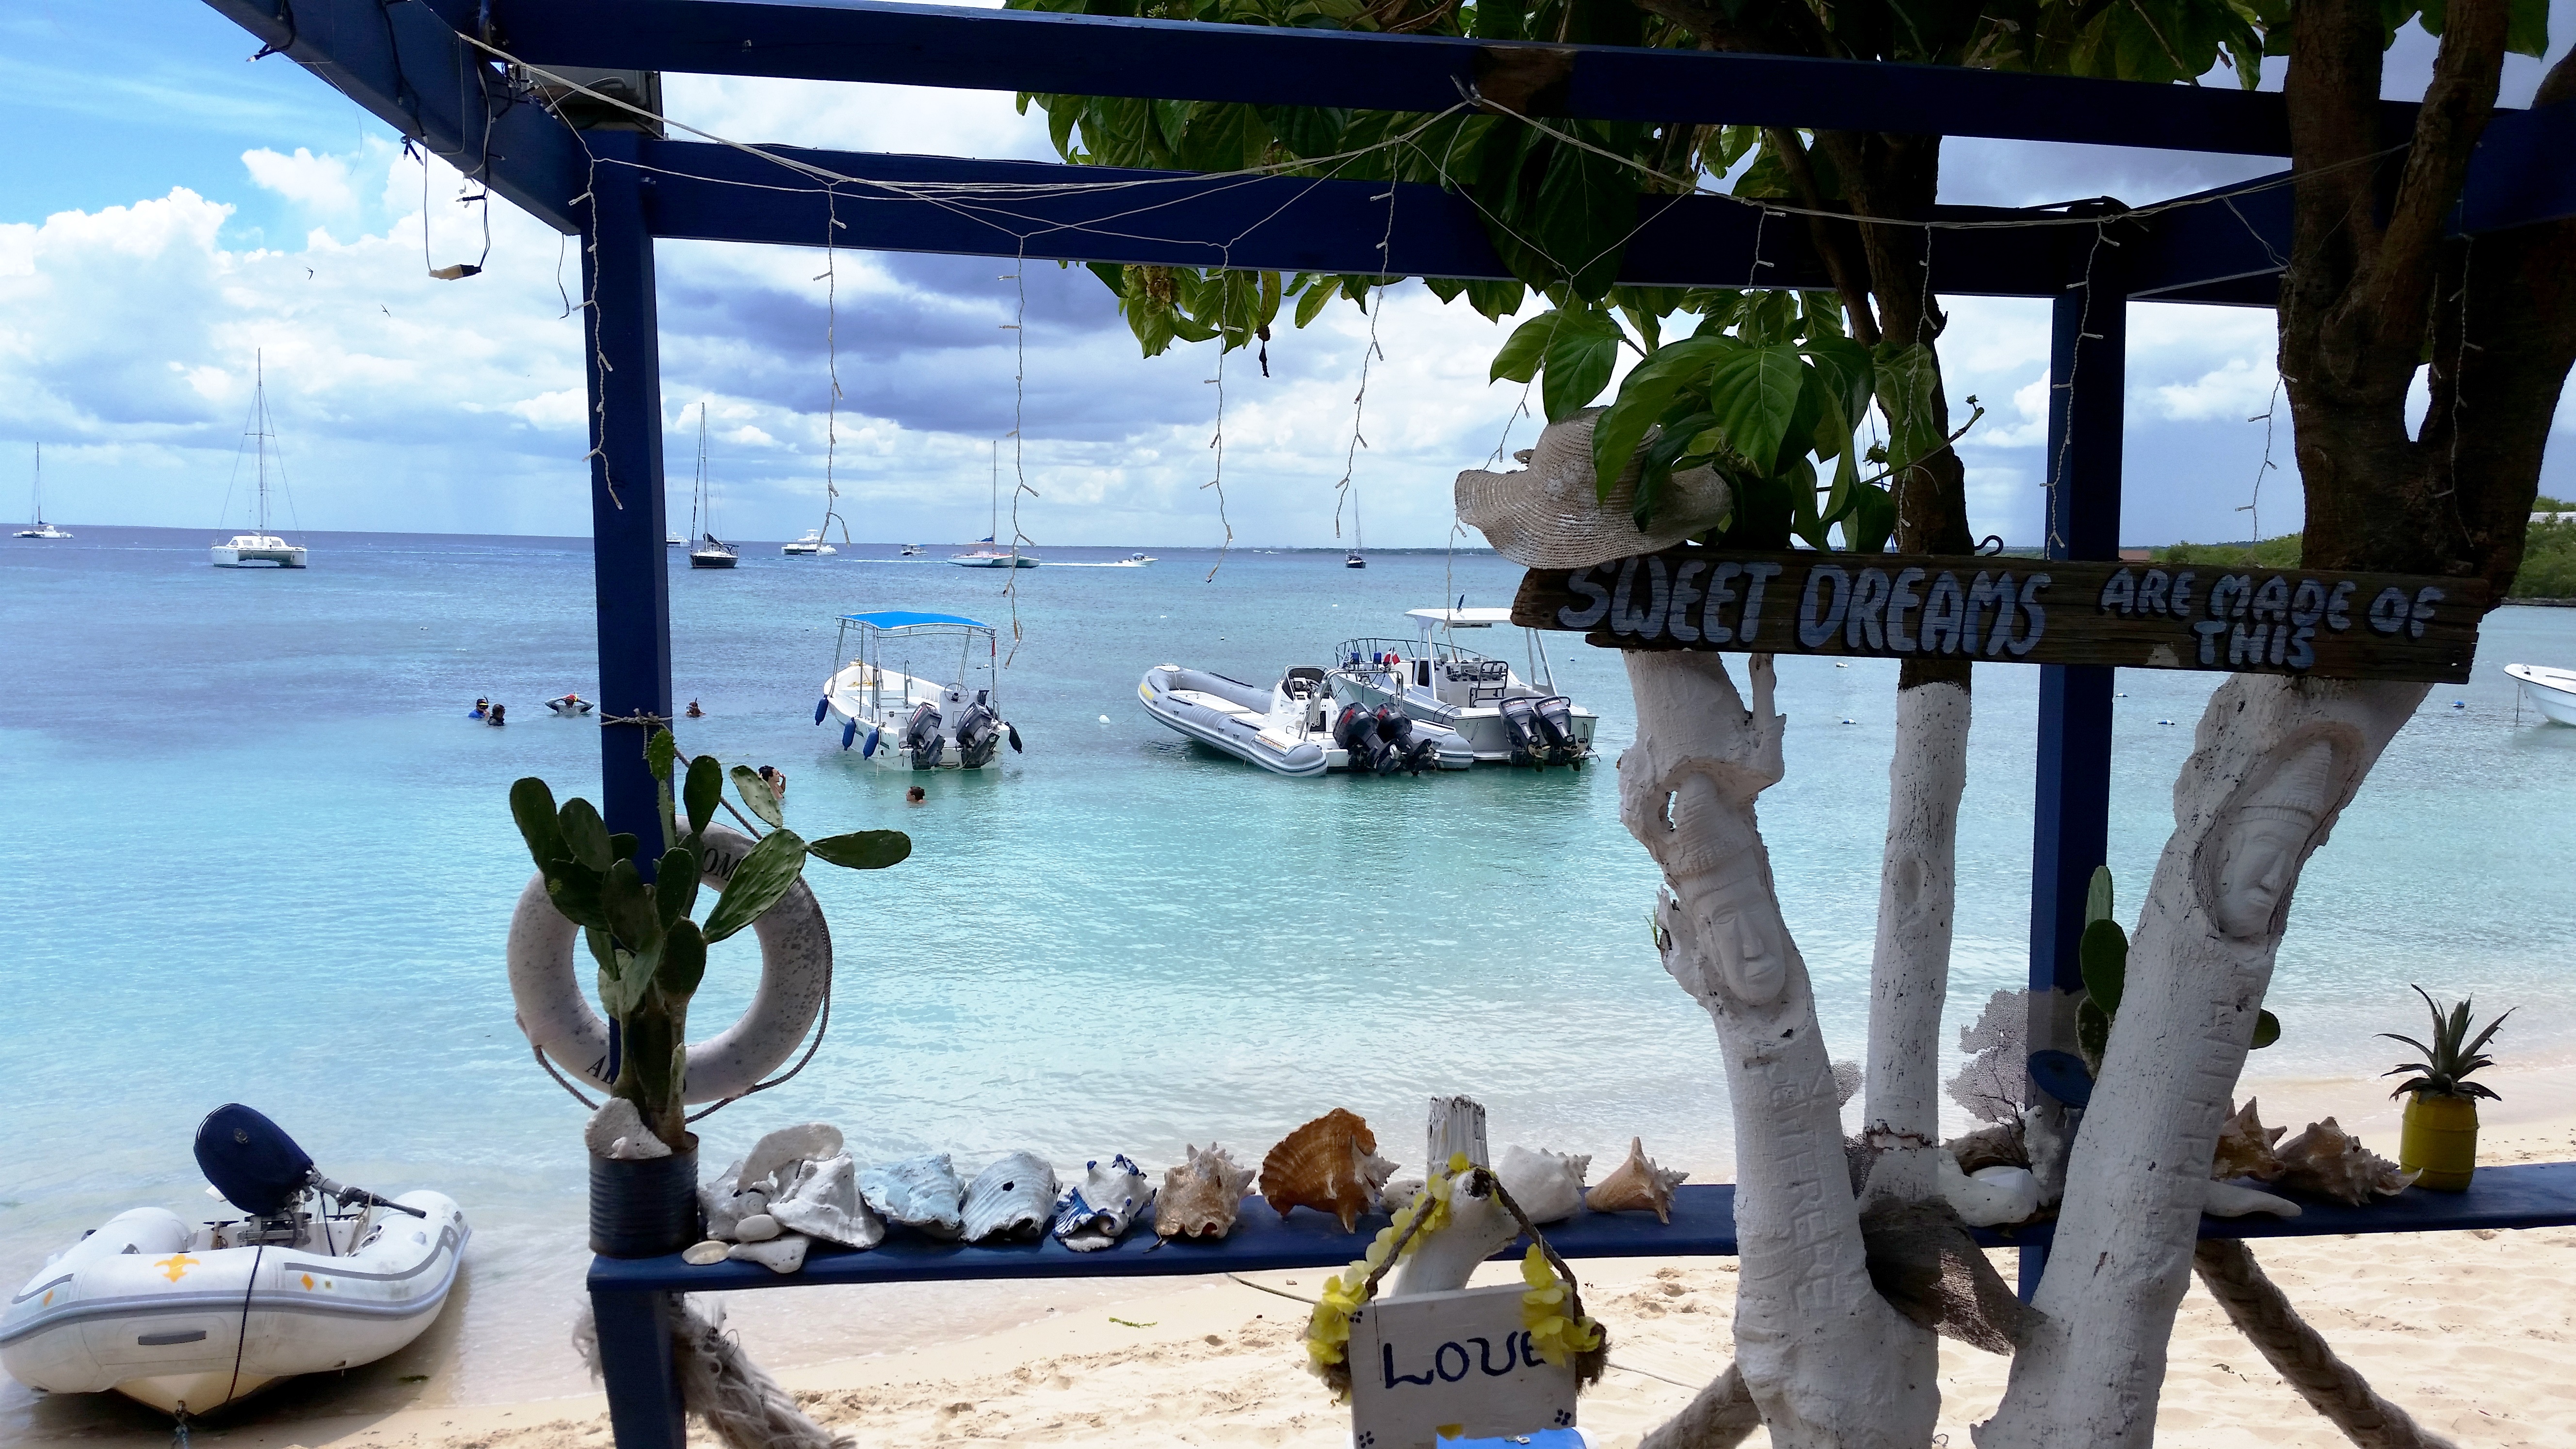 The Barco Bar in Bayahibe - our favorite hangout, and the only place we could find to beach Lagniappe